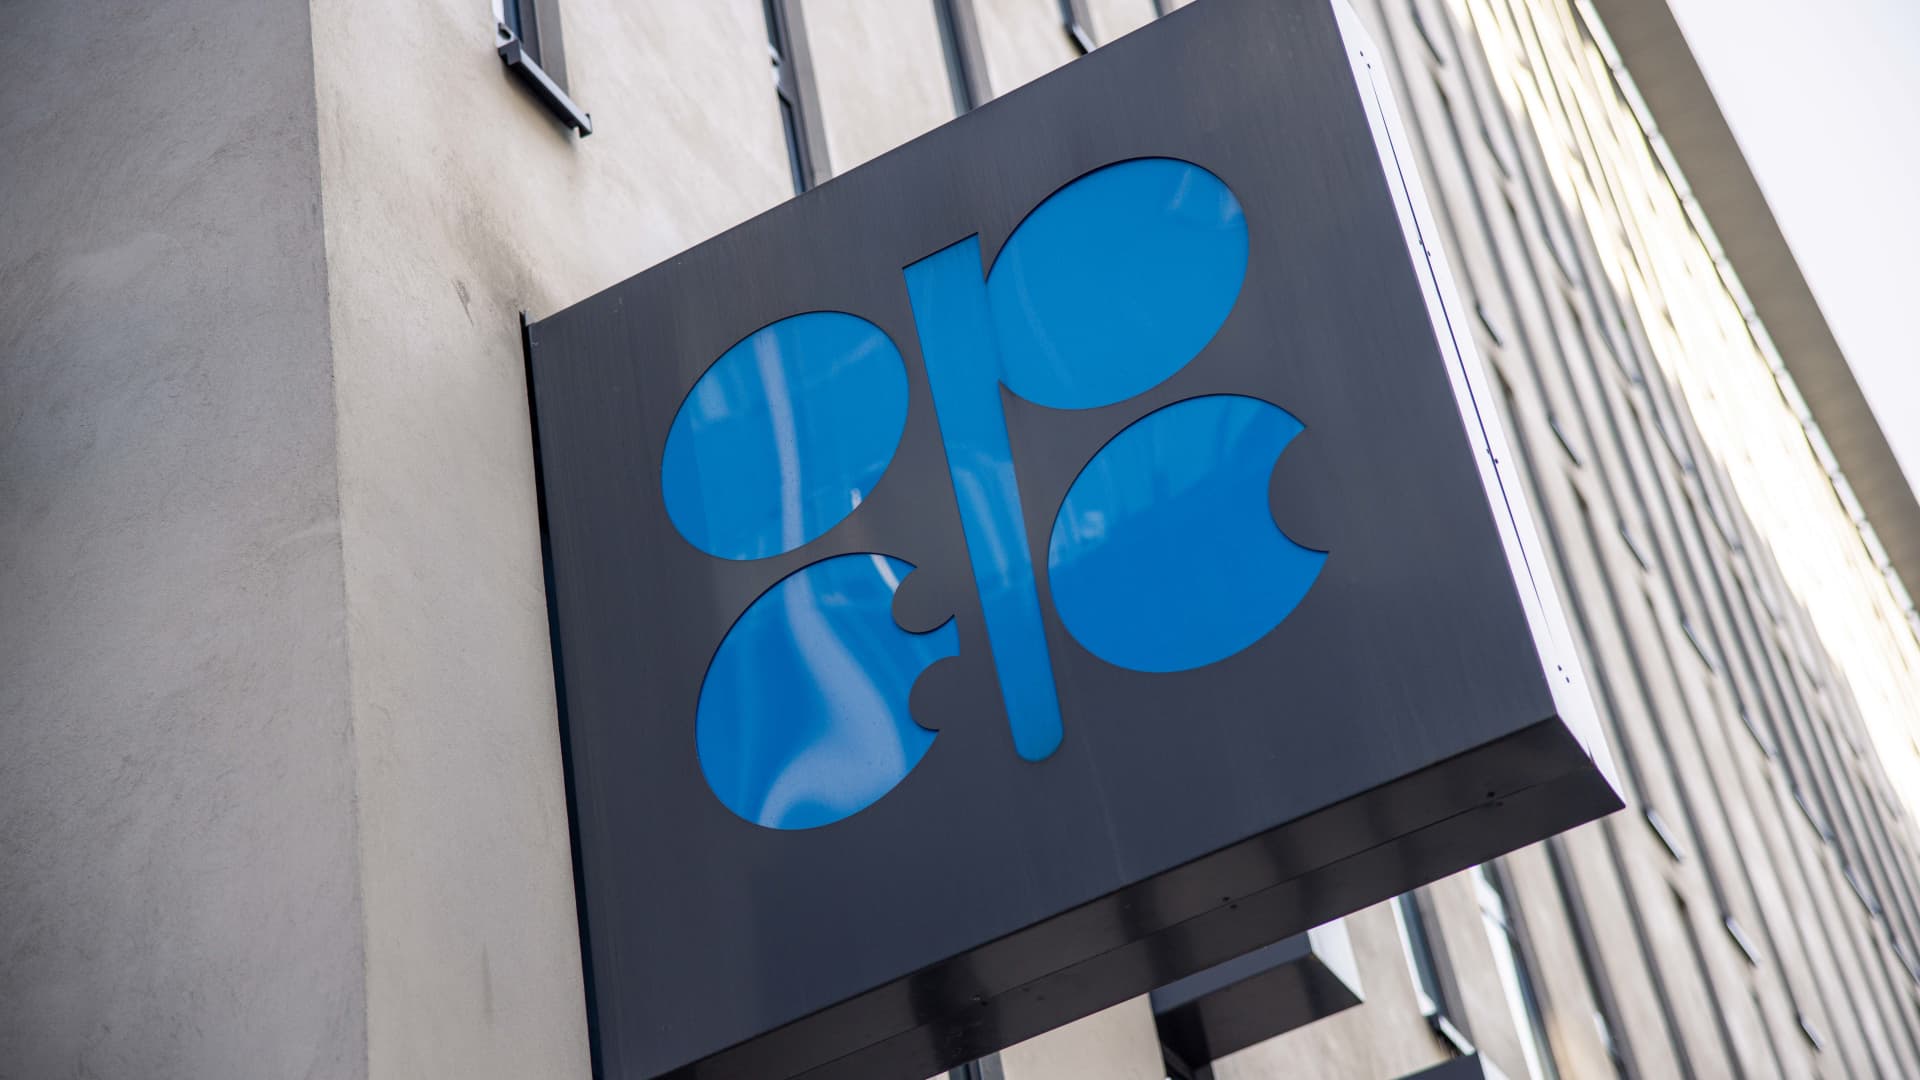 What the club sees on Tuesday – OPEC+ cuts output, banks downgraded, top industrial picks